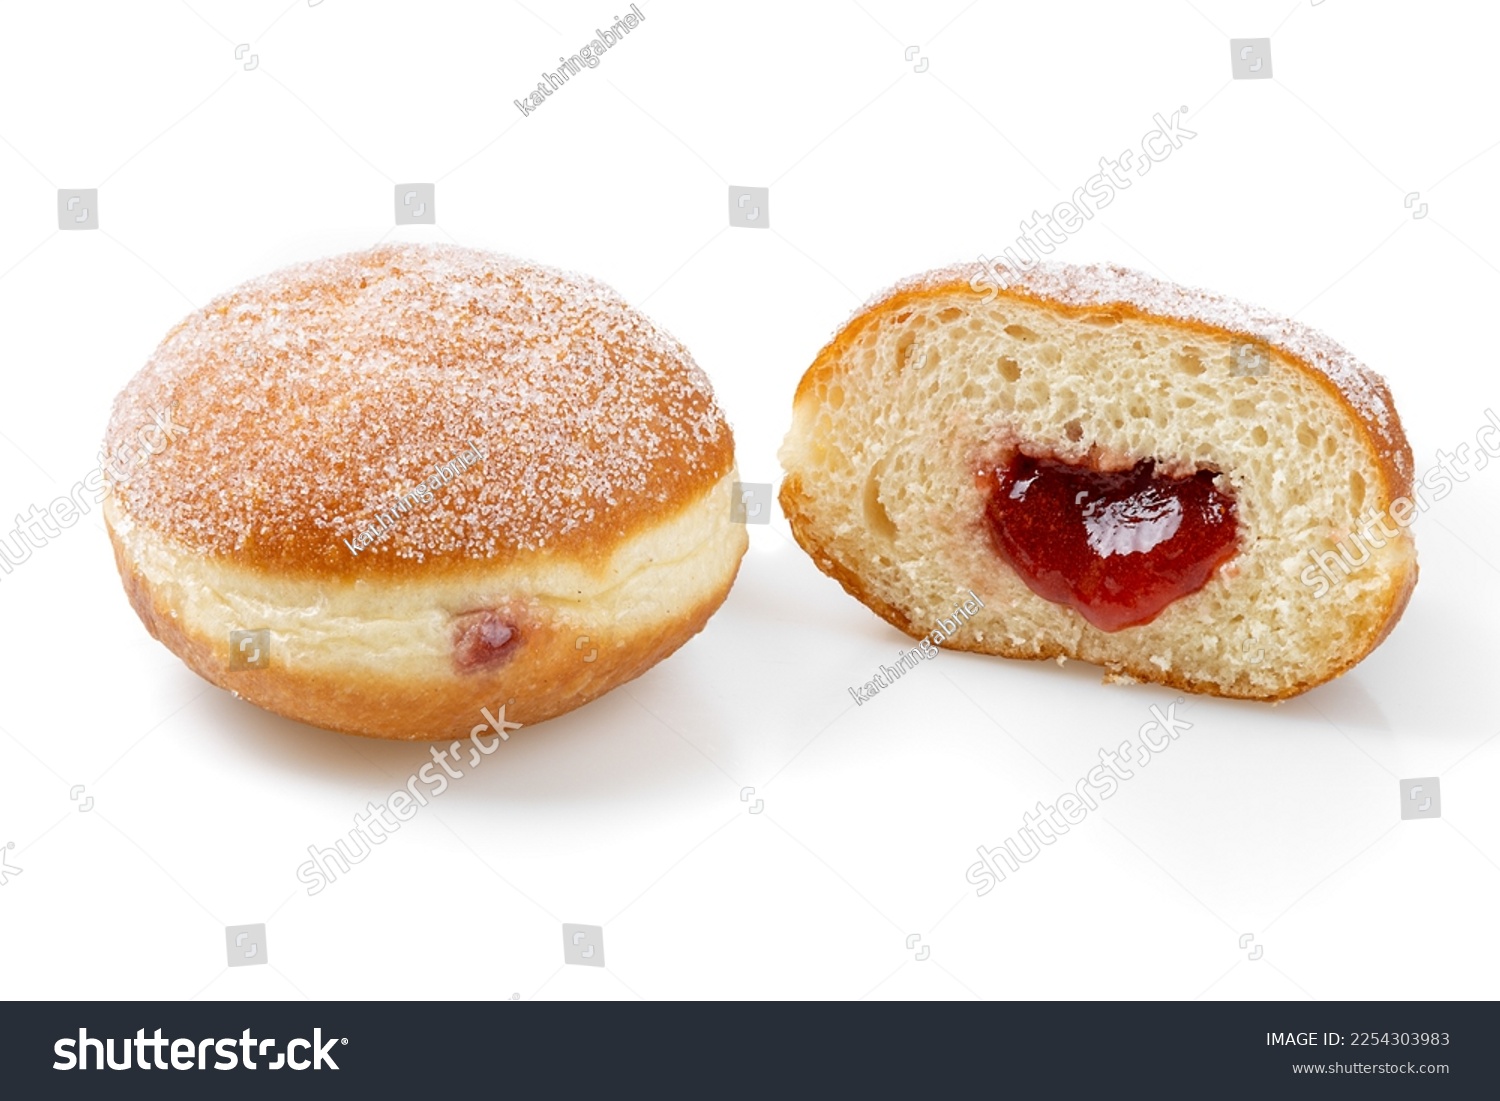 Filled doughnuts isolated white background #2254303983